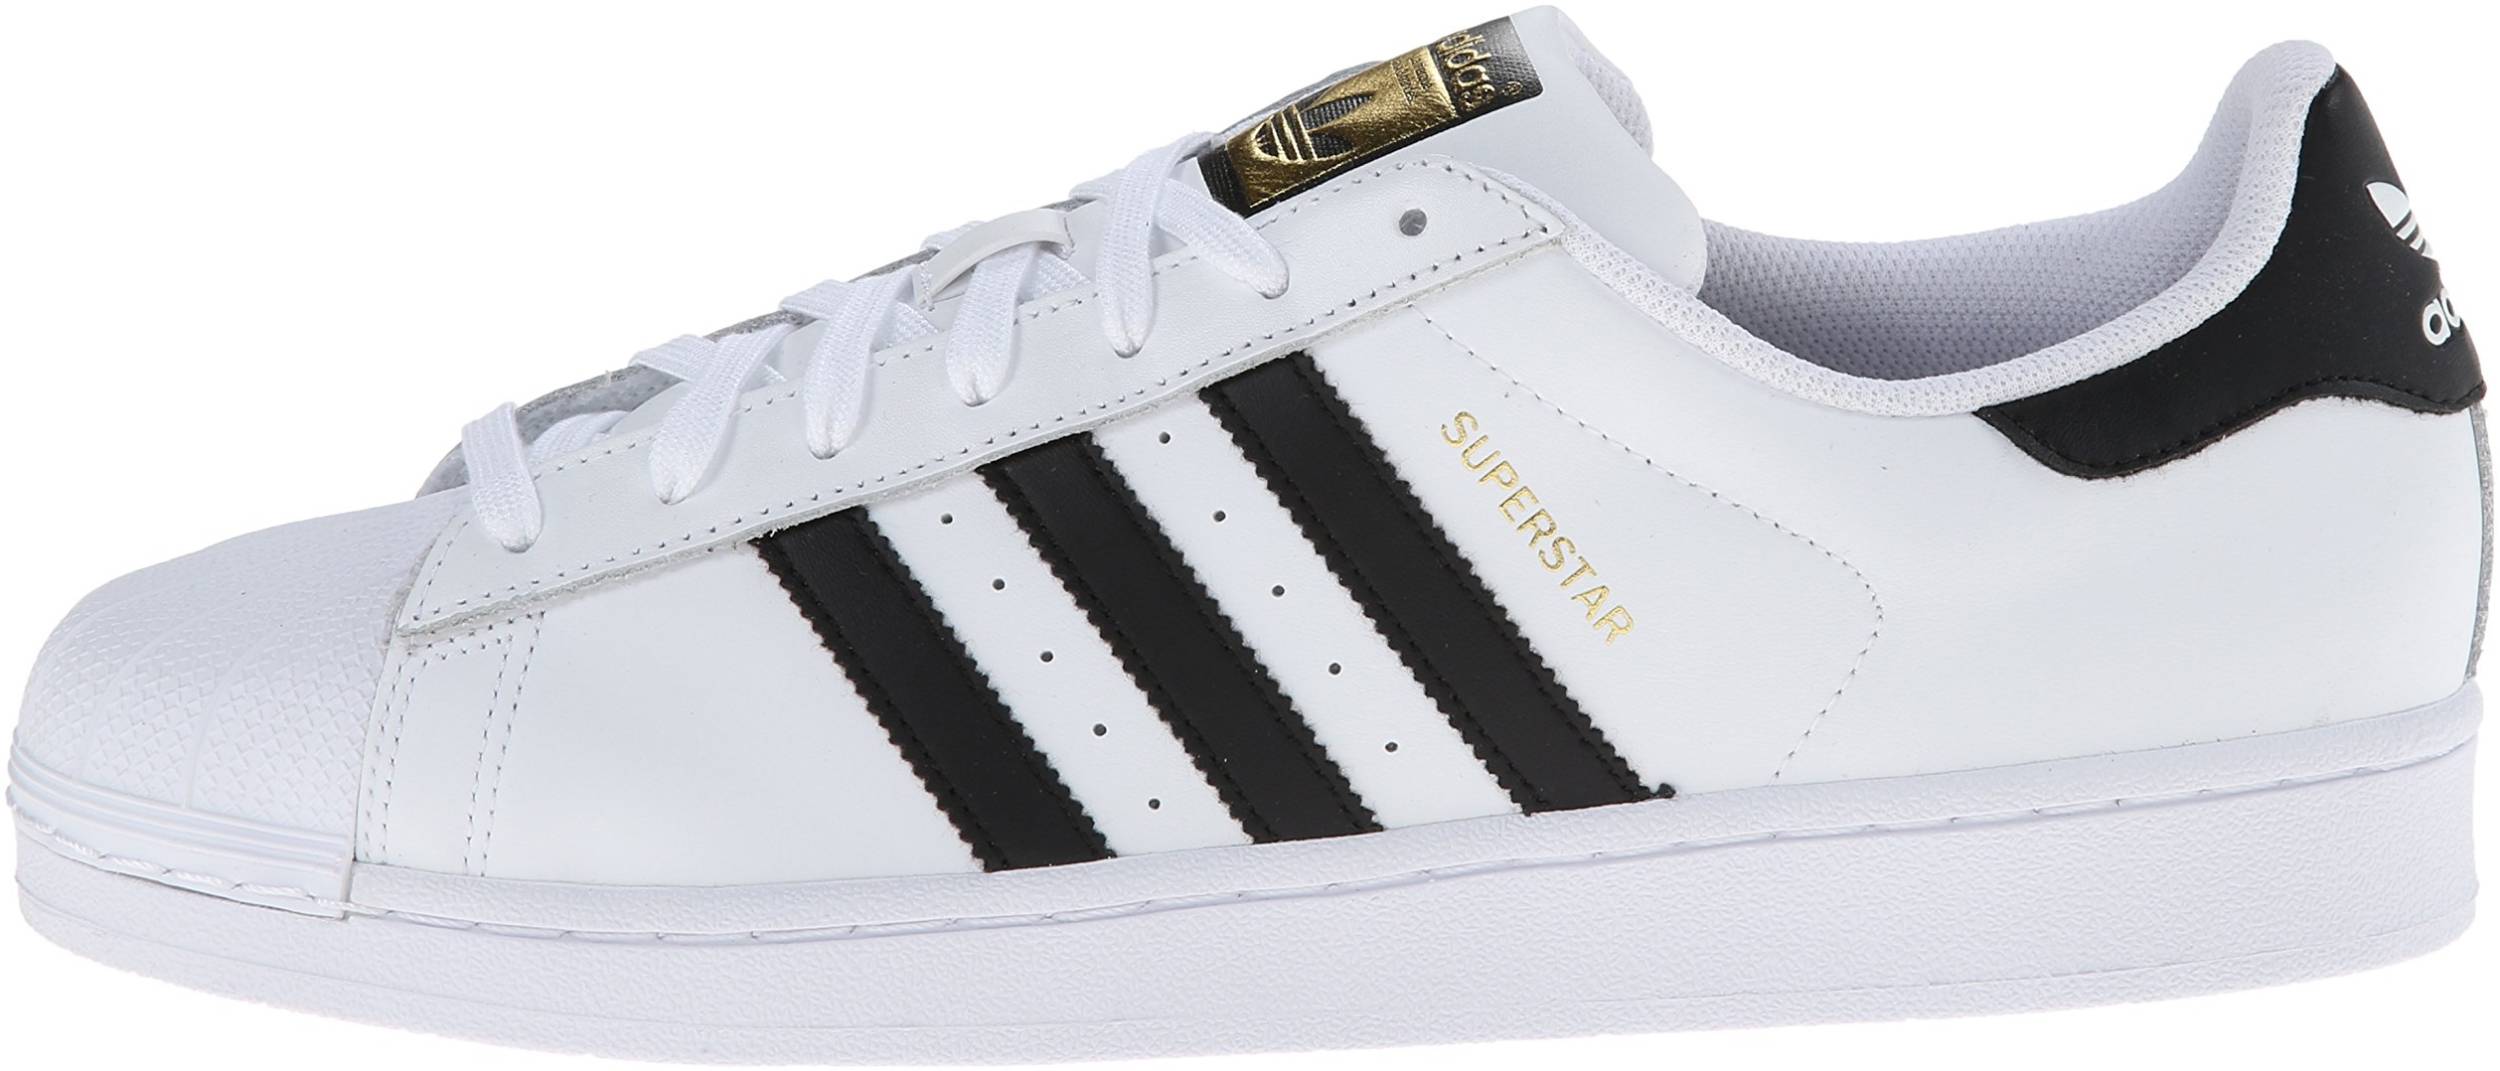 Save 53% on Adidas Superstar Sneakers 